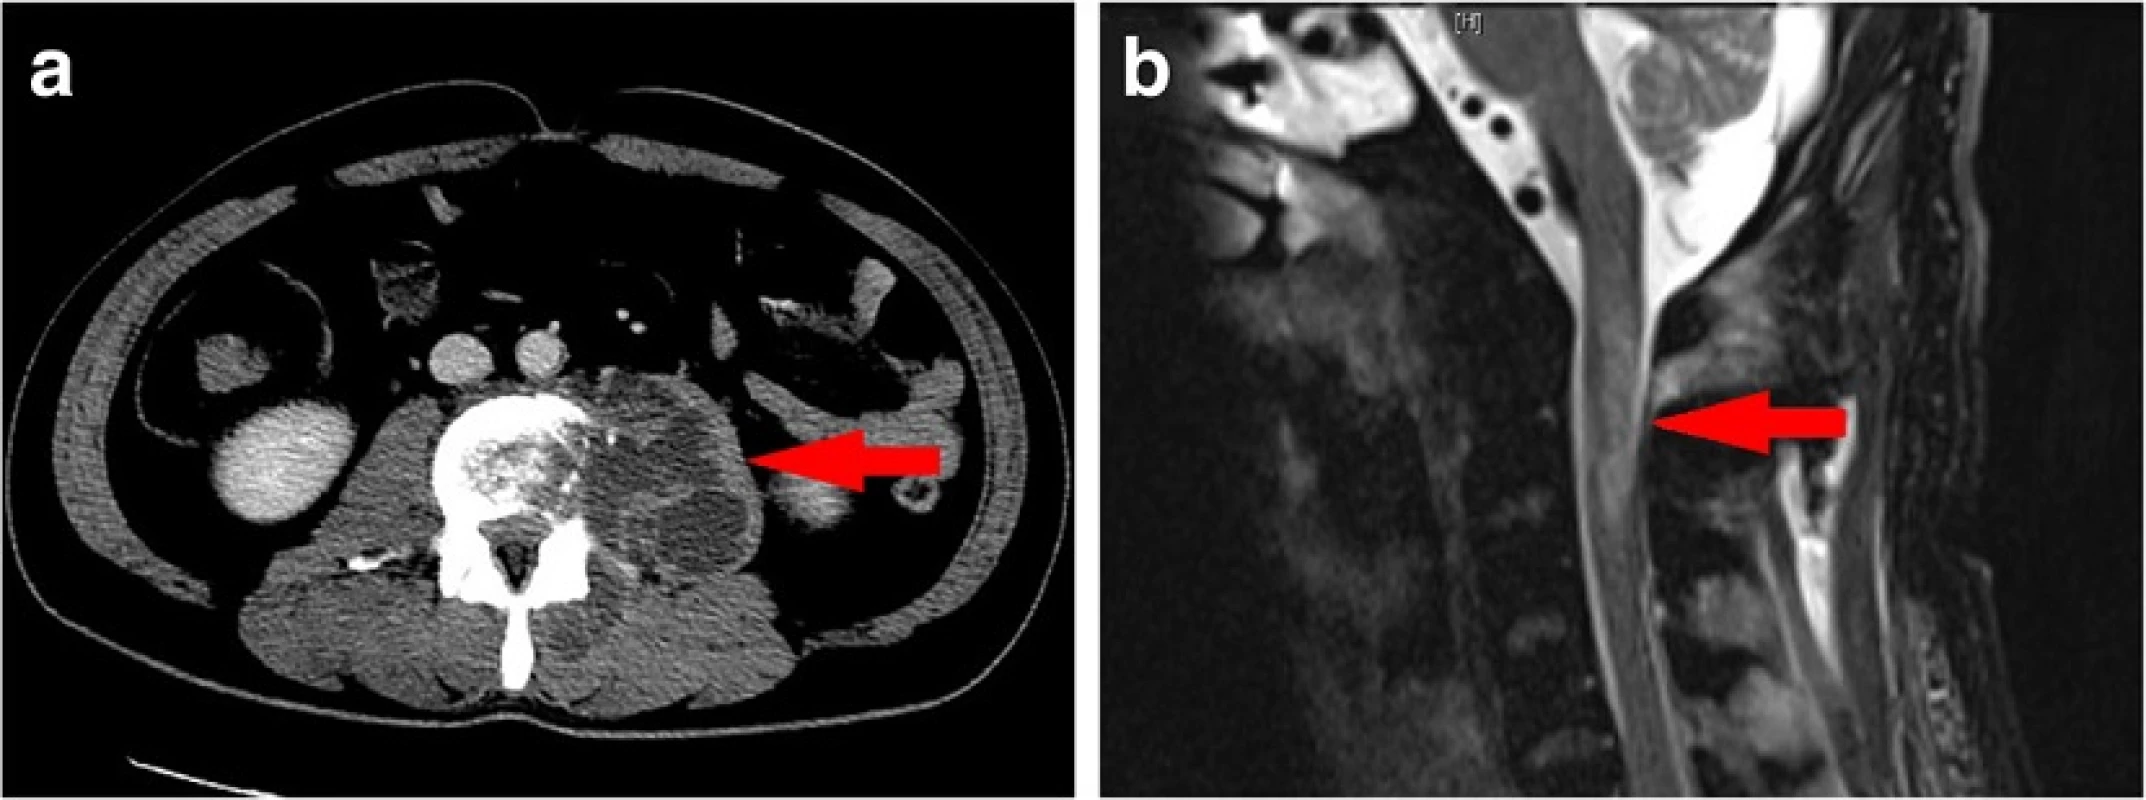 A psoas abscess and its remote involvement. a Ring enhancement in the left psoas muscle on an enhanced CT image obtained on the day of admission. b The cervical MRI findings revealed altered signal intensity involving C2-3, with cord expansion on T2-weighted sagittal sections, suggestive of myelitis